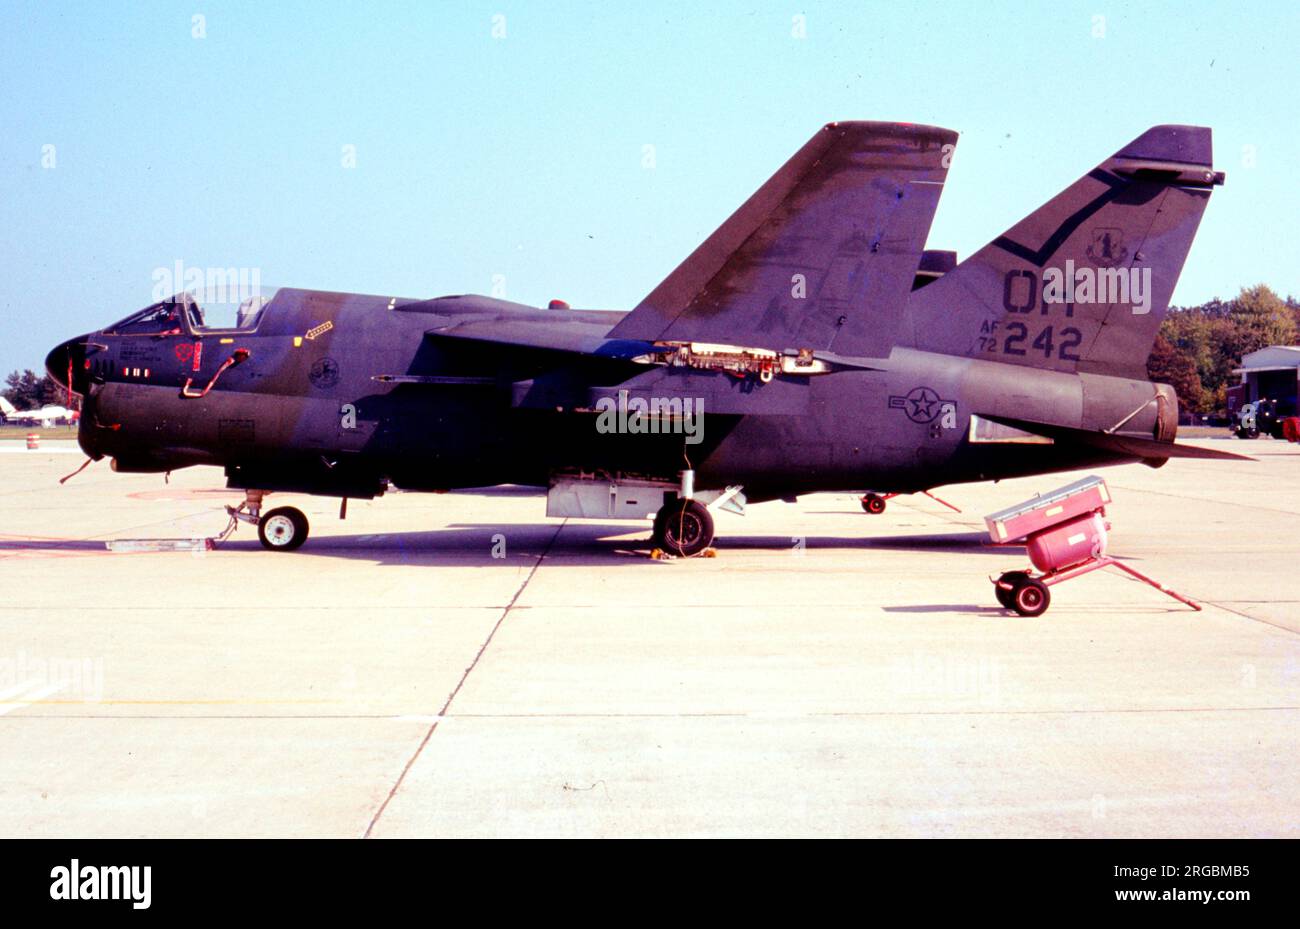 United States Air Force (USAF) - Ling-Temco-Vought A-7D-13-CV Corsair II 72-0242 (msn D-364) de l'Ohio ANG, 162nd TFS (178th TFG). Banque D'Images